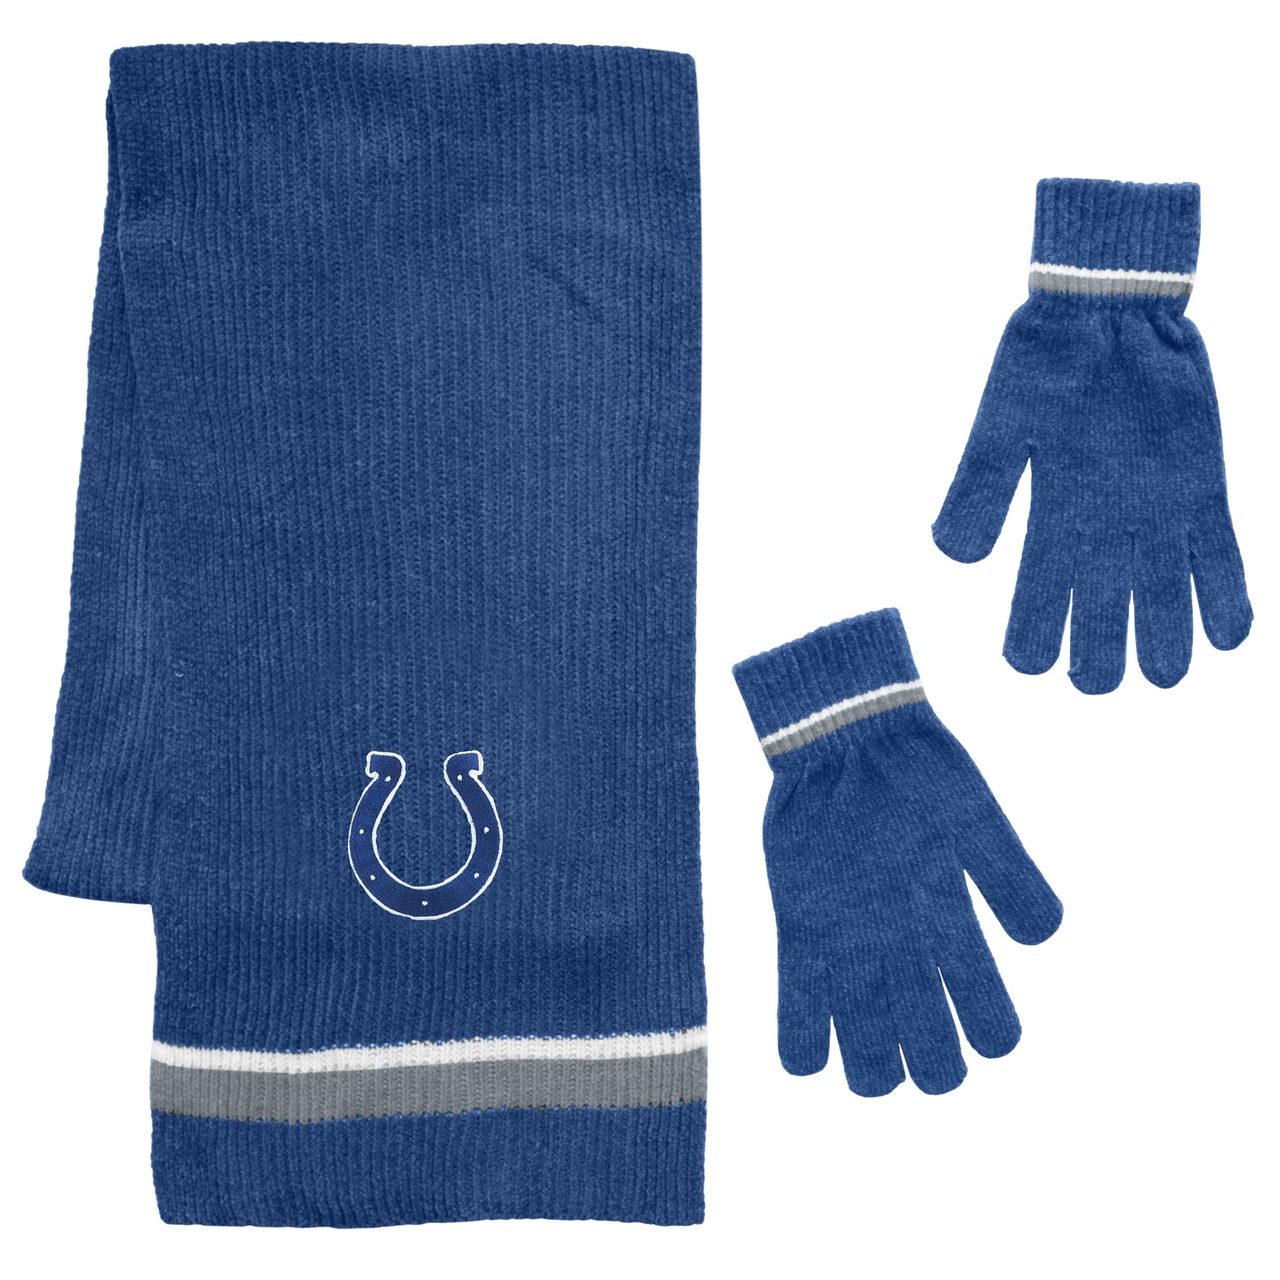 Indianapolis Colts Scarf and Glove Gift Set Chenille